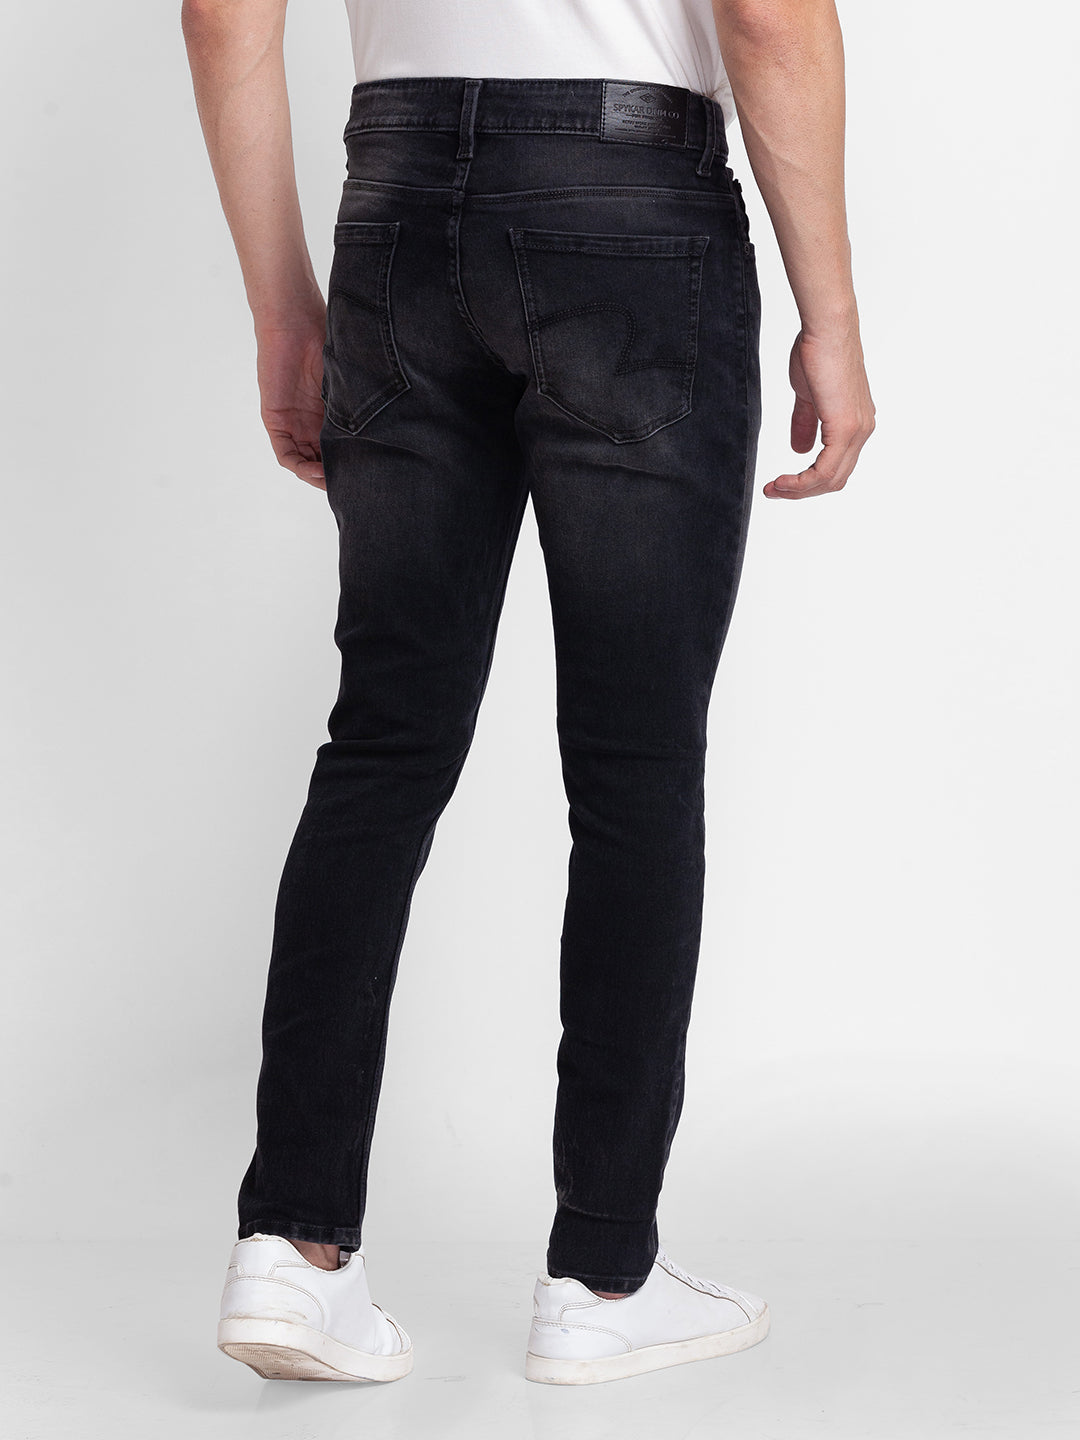 Spykar Charcoal Black Cotton Slim Fit Tapered Length Jeans For Men (Kano)